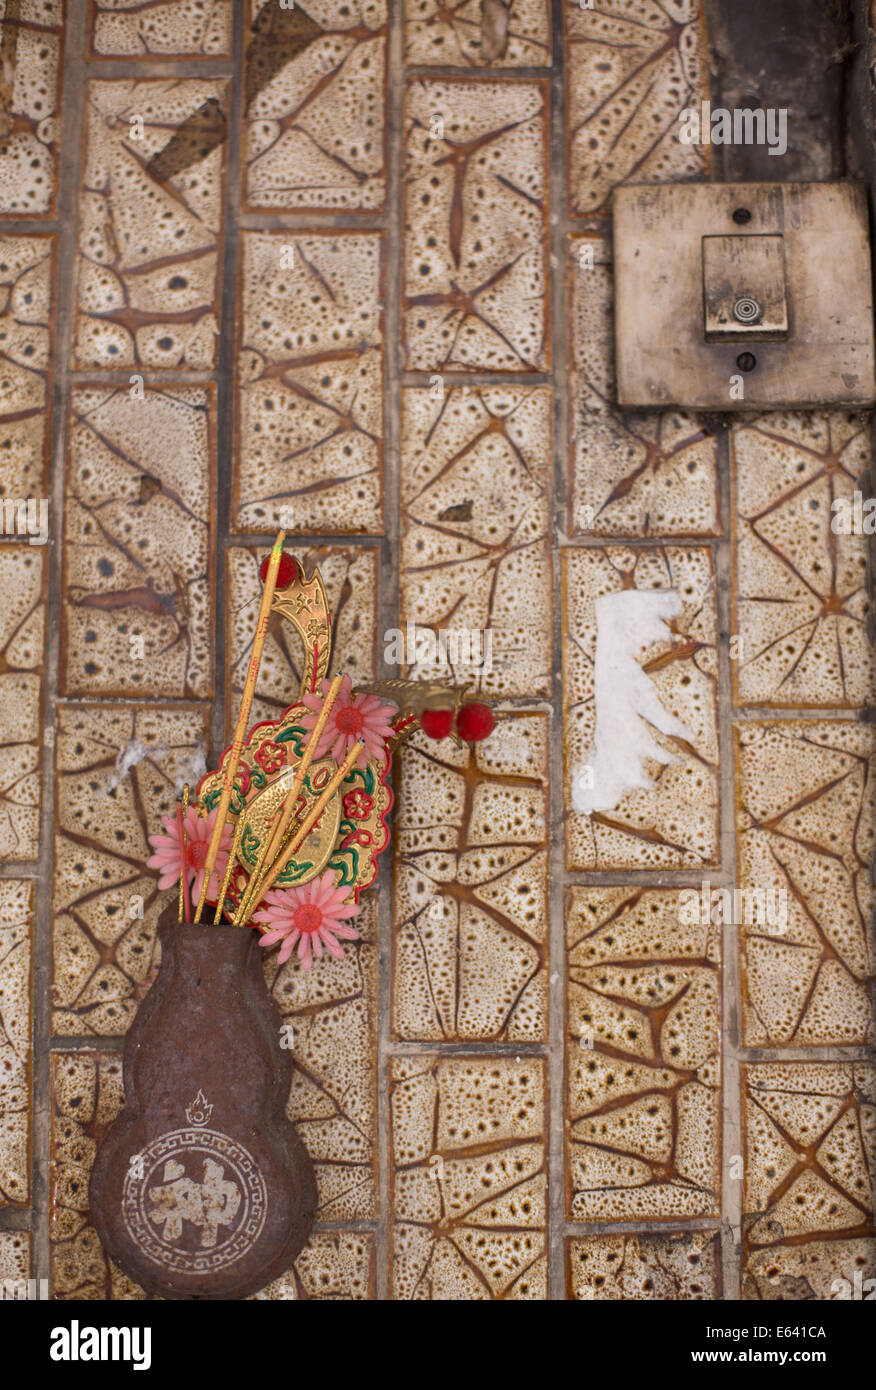 A small incense holder hangs on a patterned wall, Chinatown, Bangkok, Thailand Stock Photo